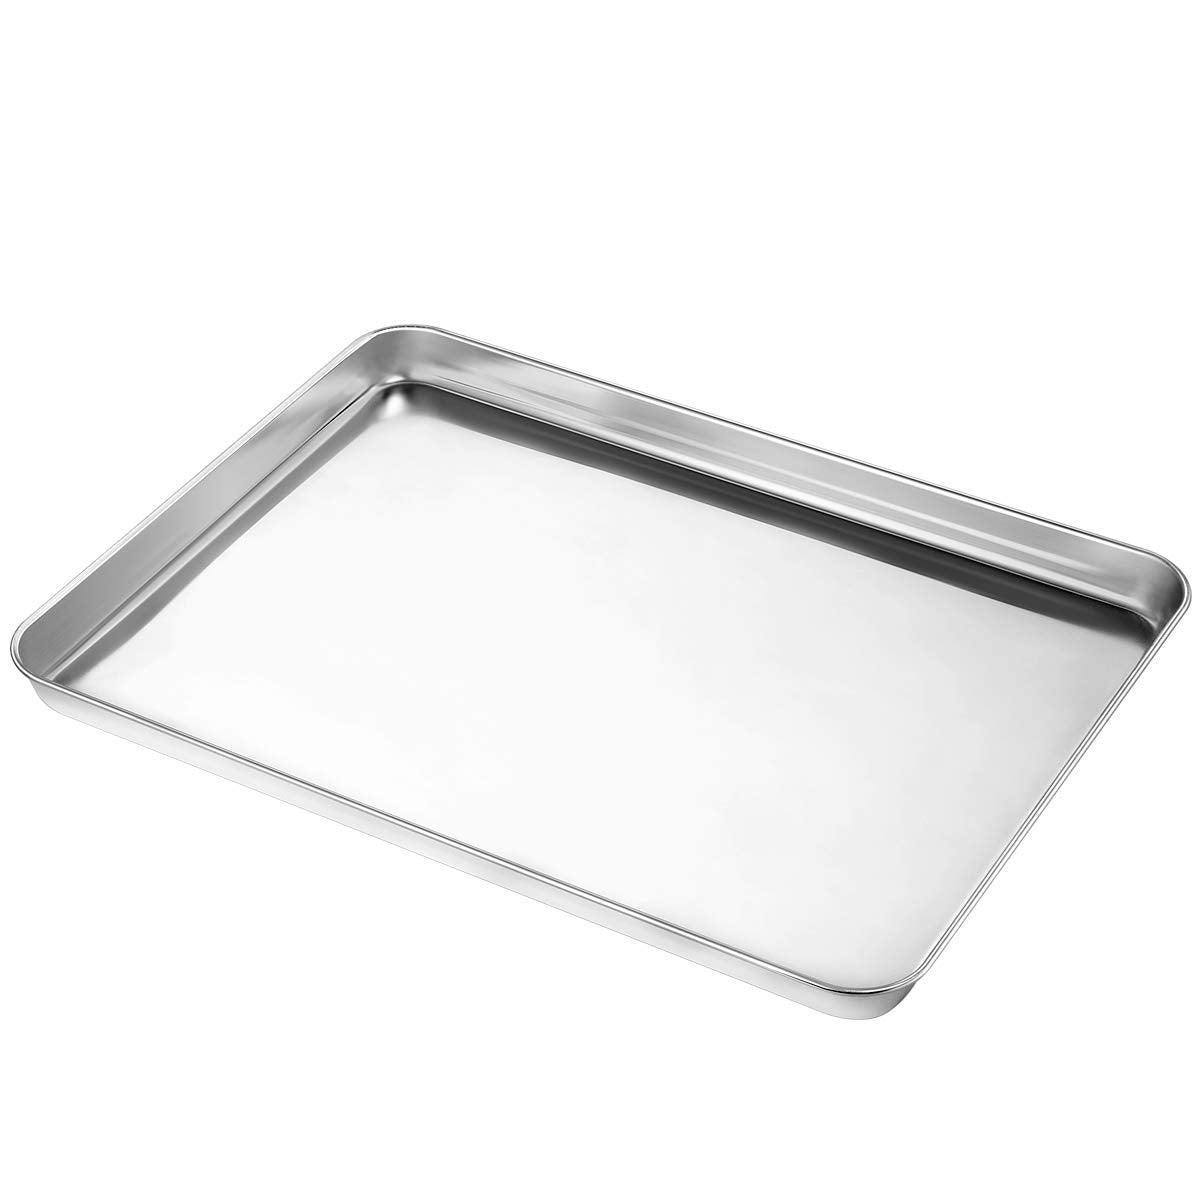 Wildone Baking Sheet Set of 3, Stainless Steel Cookie Sheet Baking Sheet Pan, 9/12/16 Inch, Non Toxic & Heavy Duty & Easy Clean - CookCave